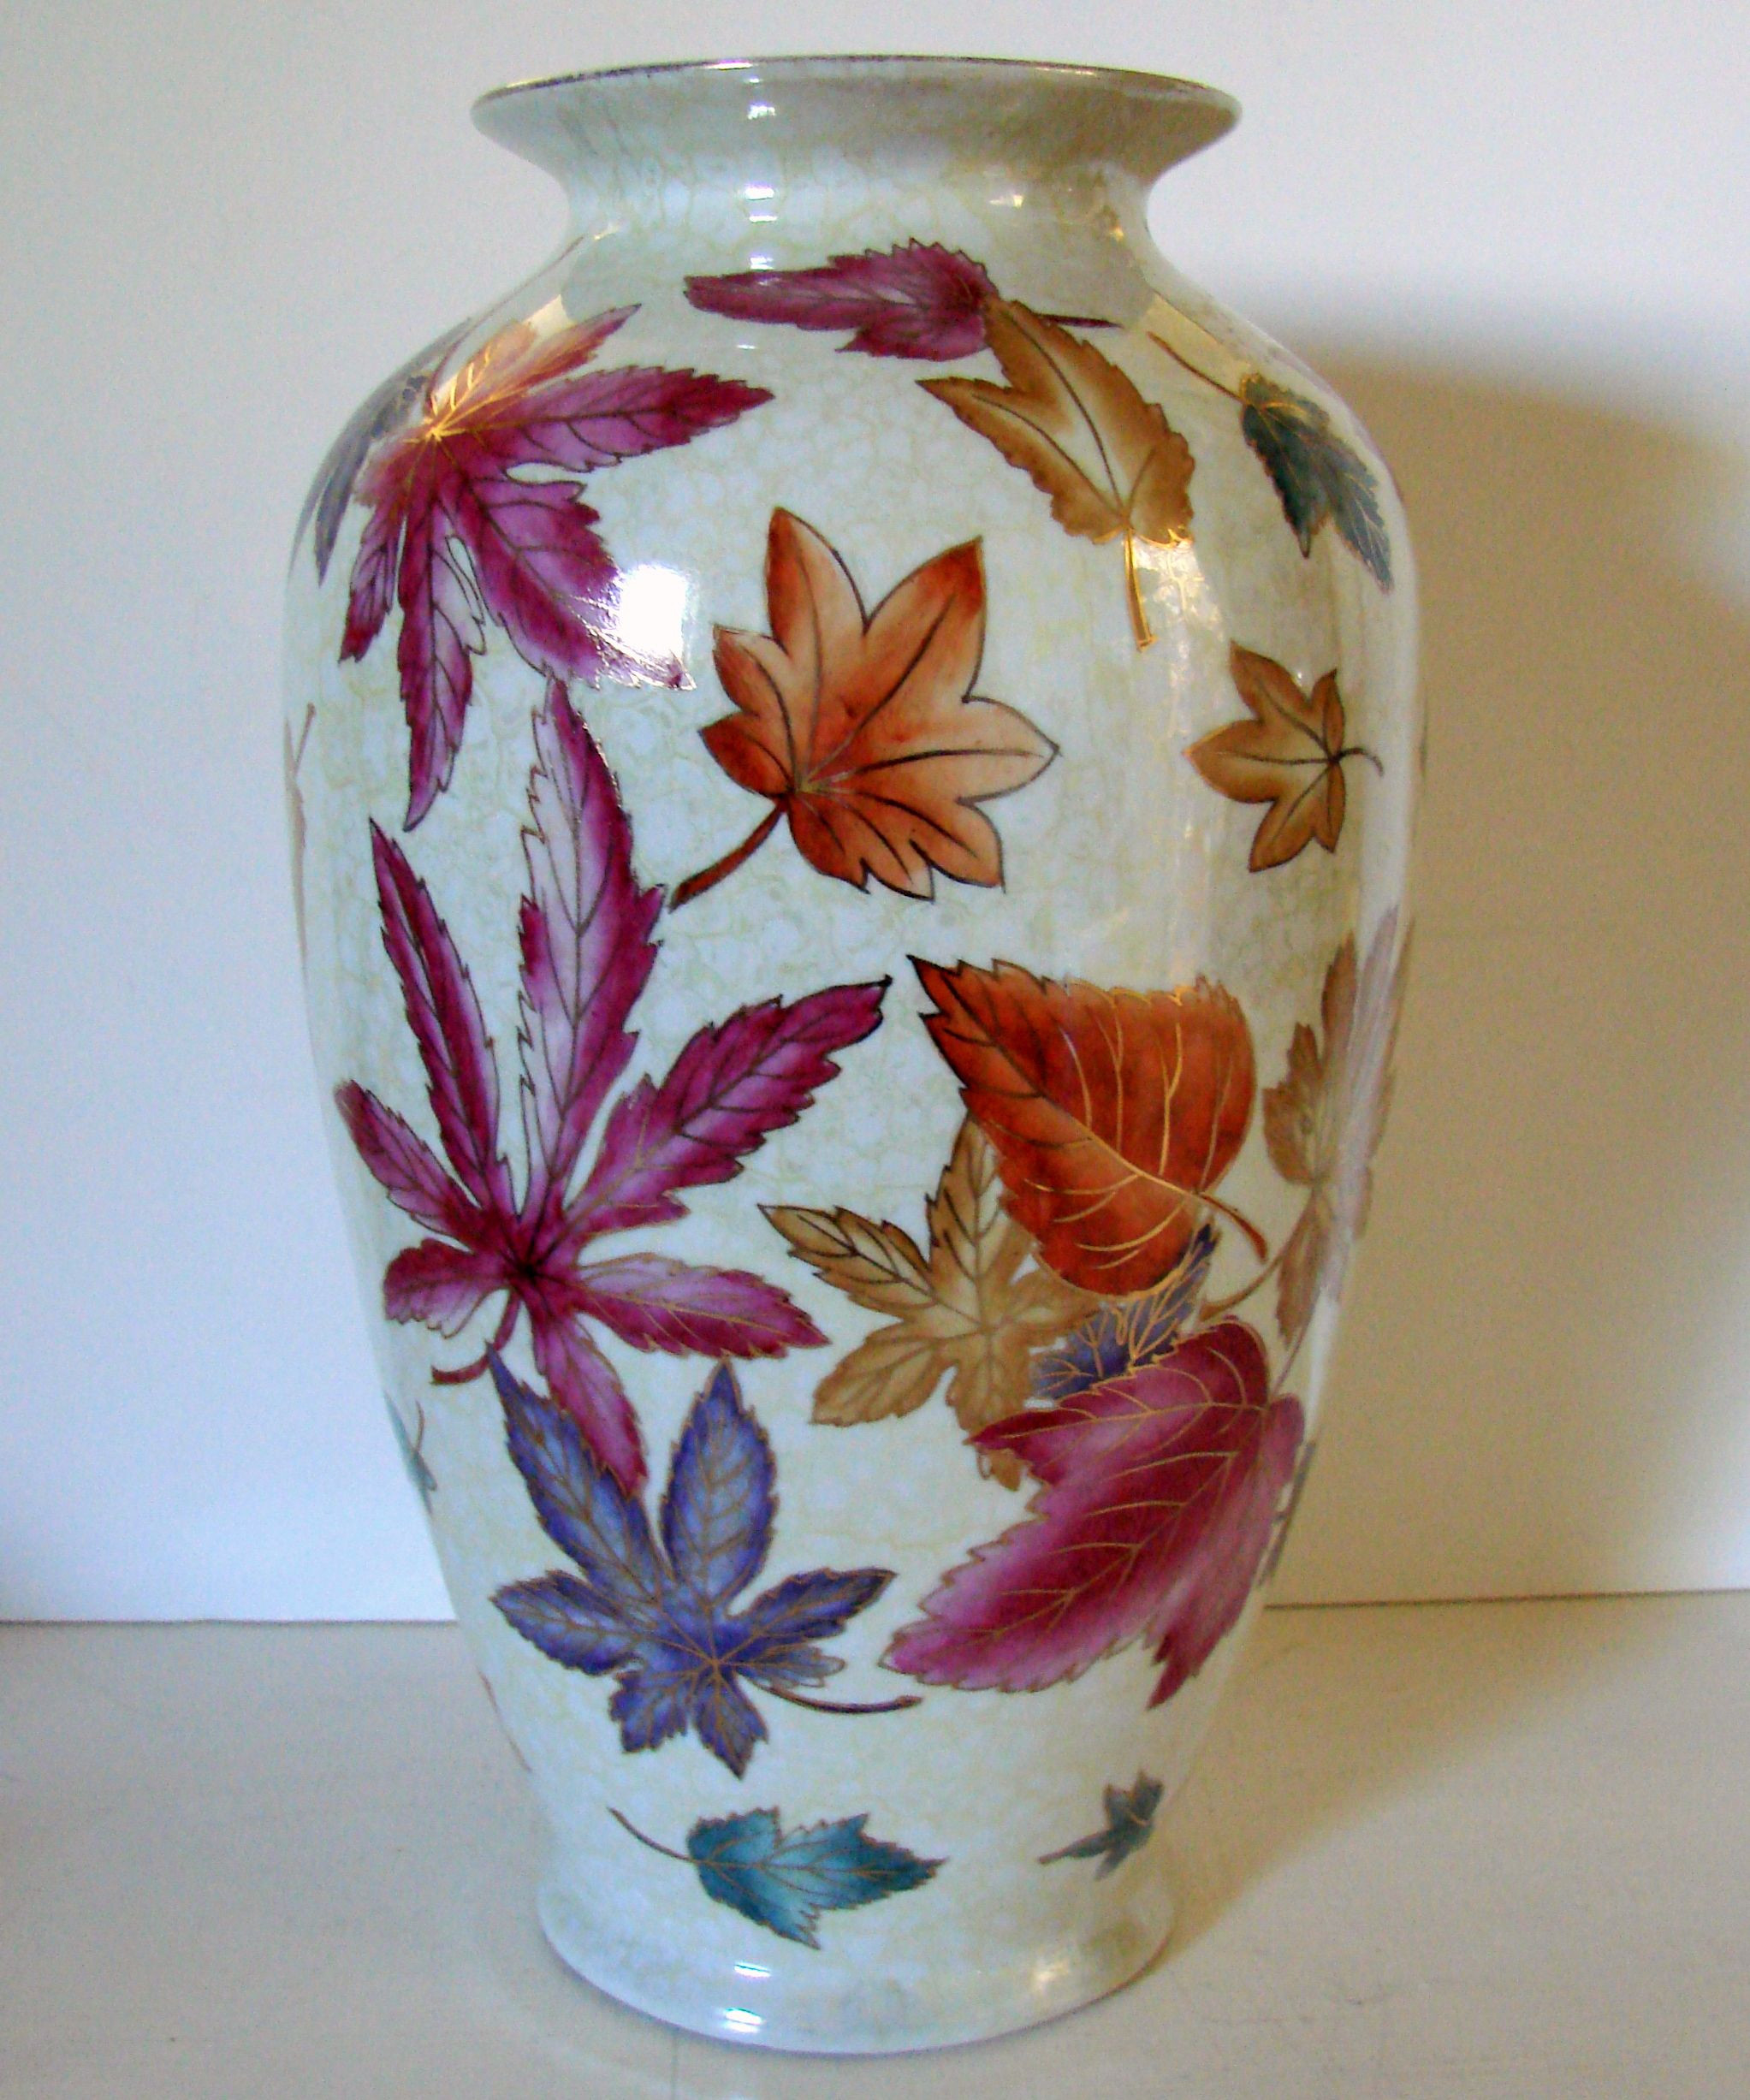 20 Nice Extra Large Round Vase 2024 free download extra large round vase of large porcelain vase w autumn leaves gold rust white 14 5 x 10 with regard to large porcelain vase w autumn leaves gold rust white 14 5 x